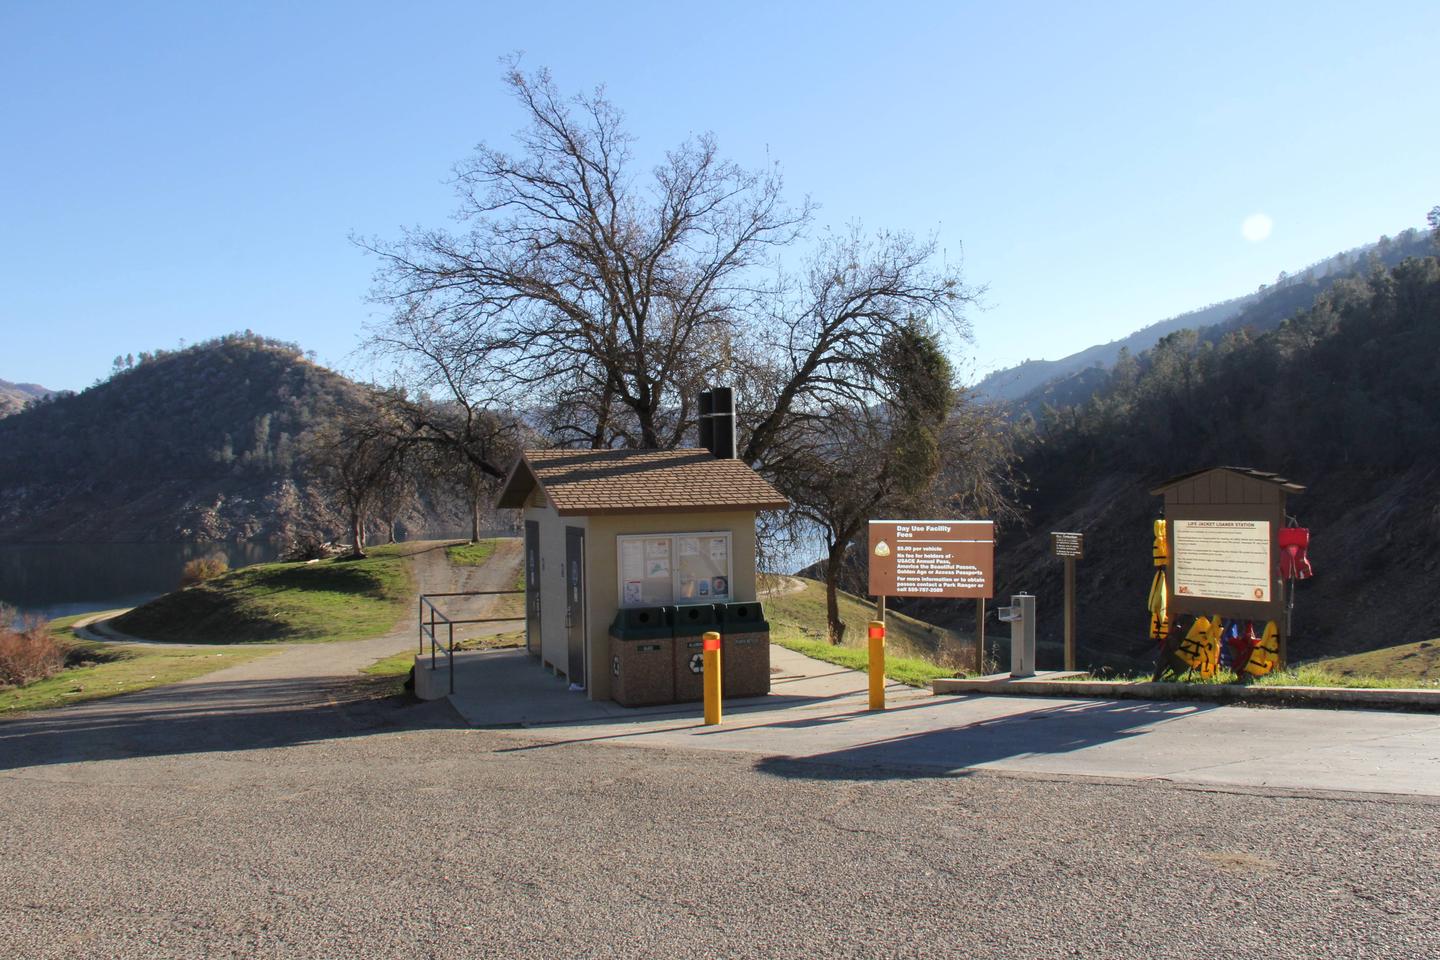 TRIMMER CAMPGROUND Day Use AreaDAY USE AREA SELF PAY STATION - NO CAMPING FEES PAID HERE - PARK RANGERS WILL COLLECT